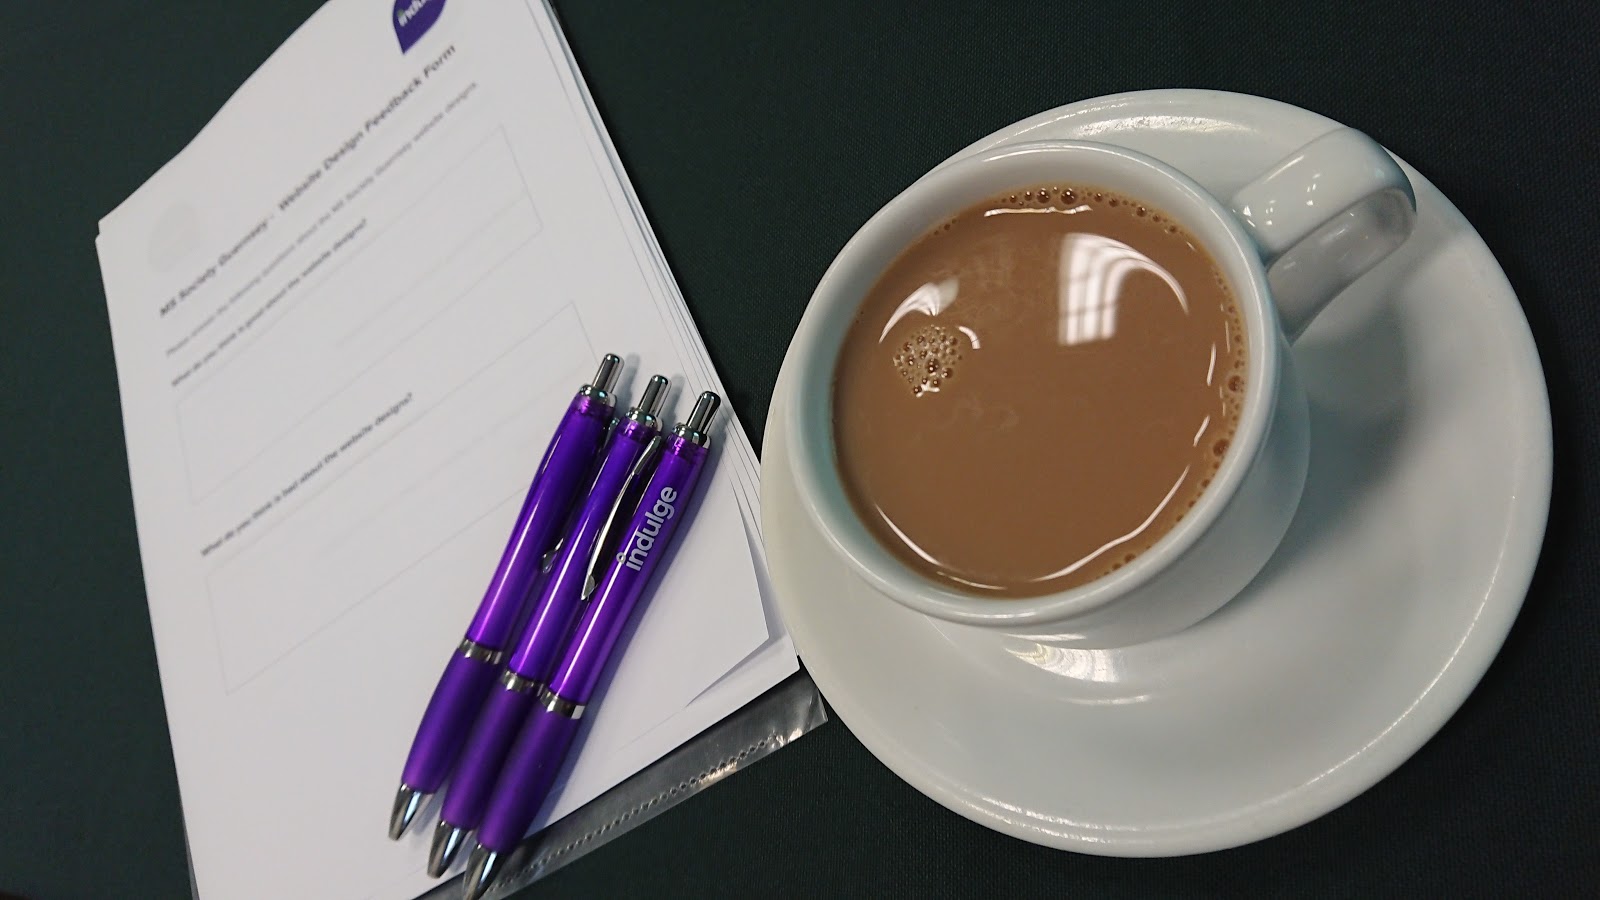 Website briefing document, Indulge pens and a cup of tea